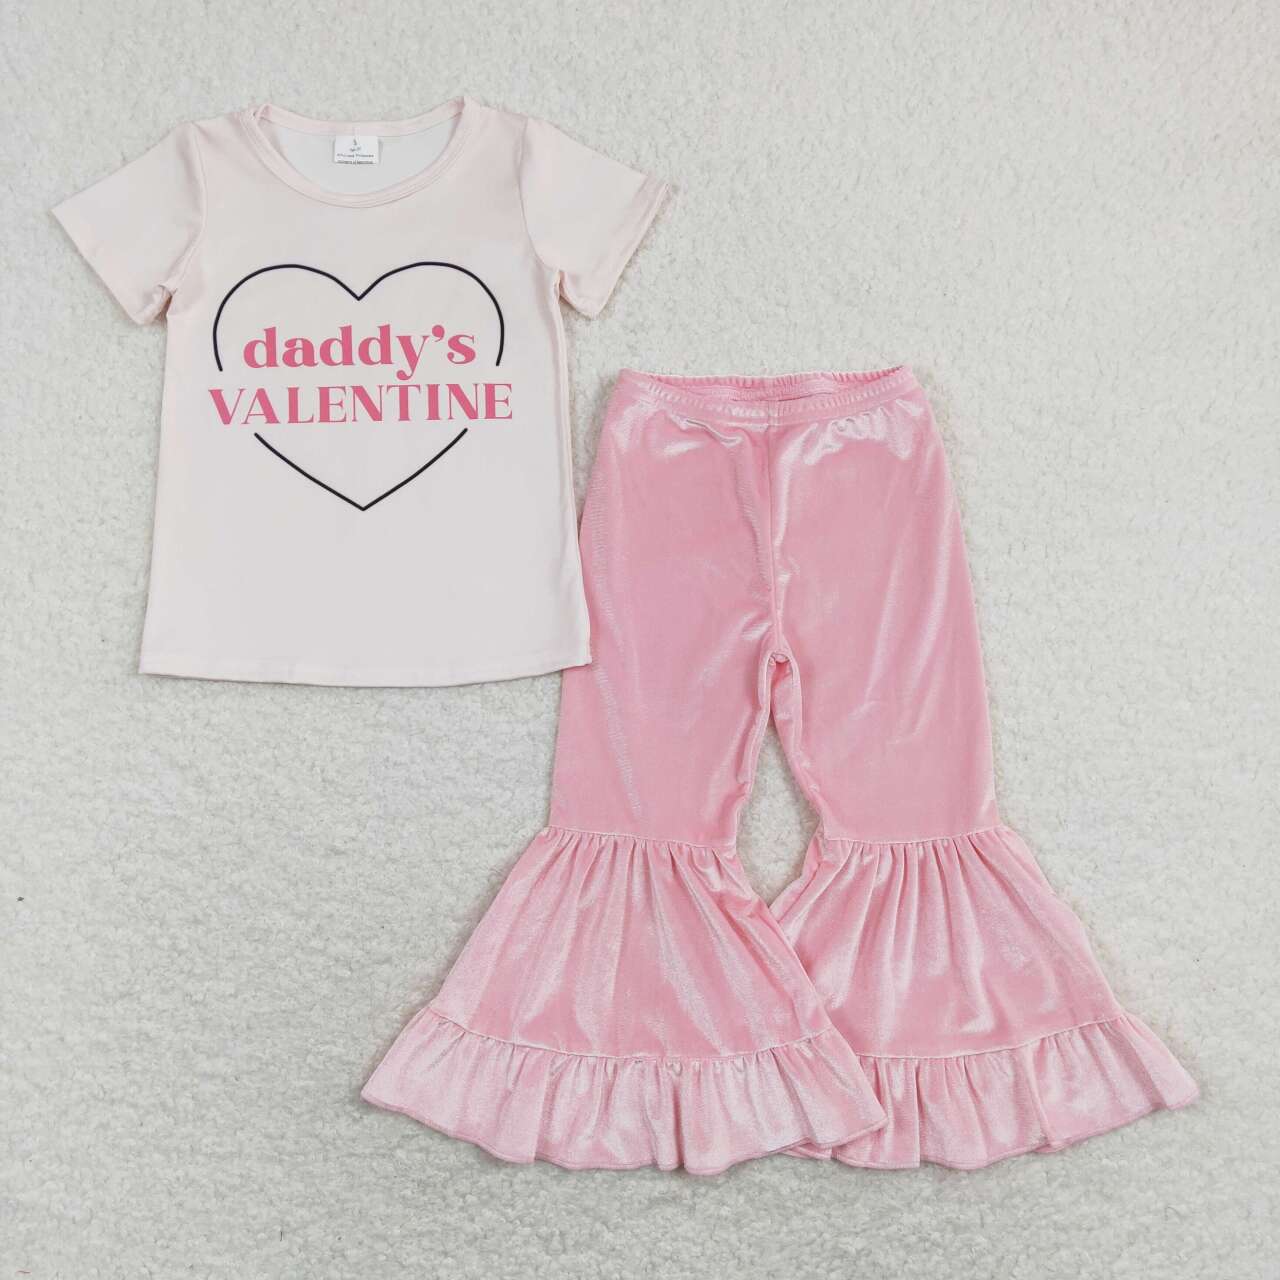 Daddys valentine shirt pink velvet bell bottoms outfit